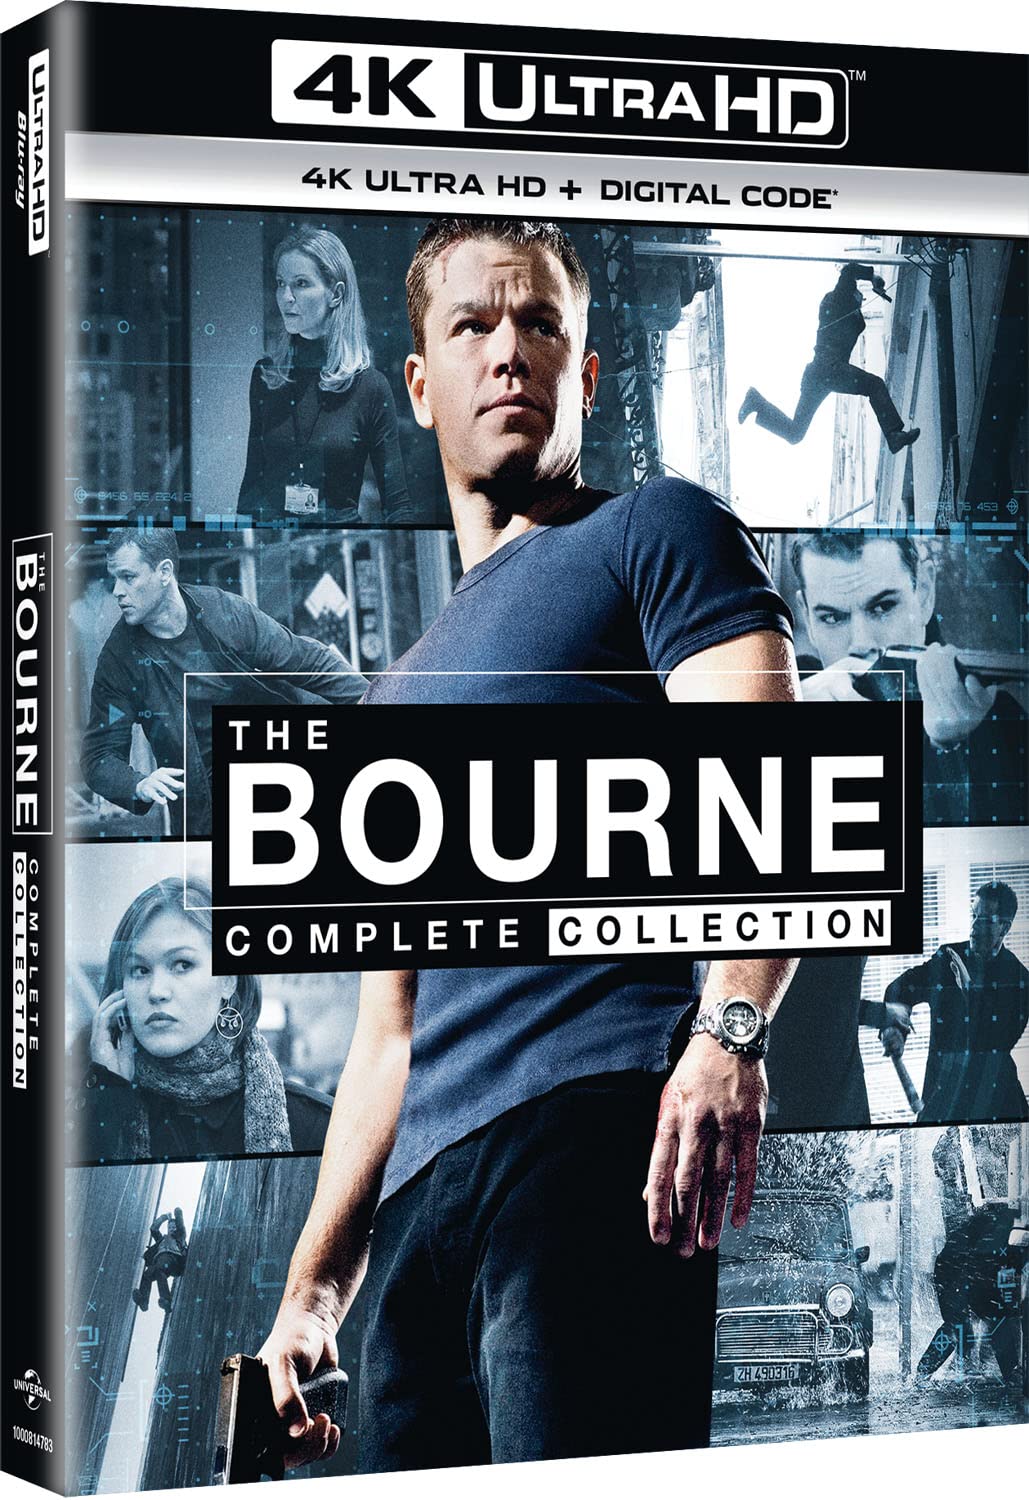 The Bourne Complete Collection 4k Blu-ray angle